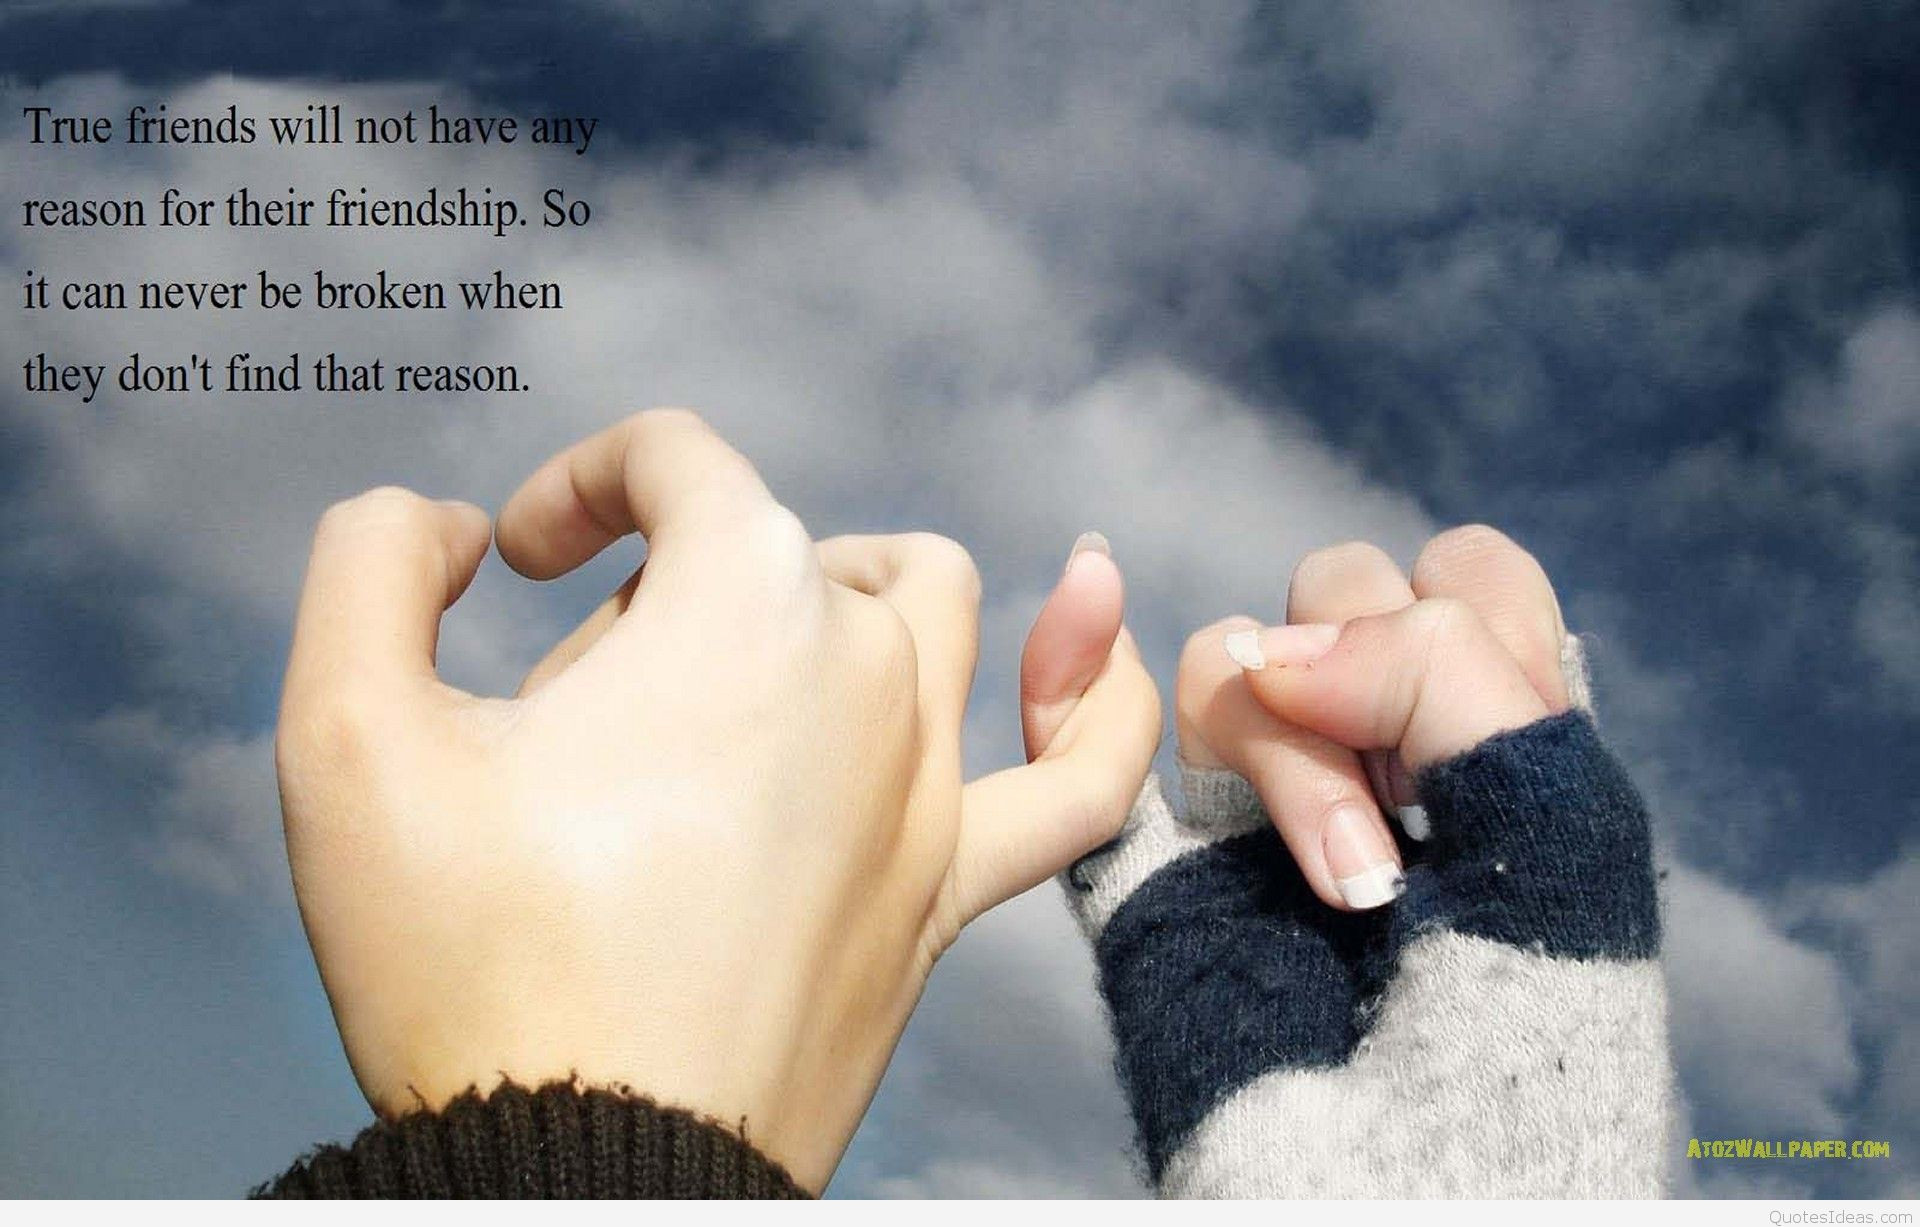 Friendship Pic Quotes
 Best friendship wallpaper with quote